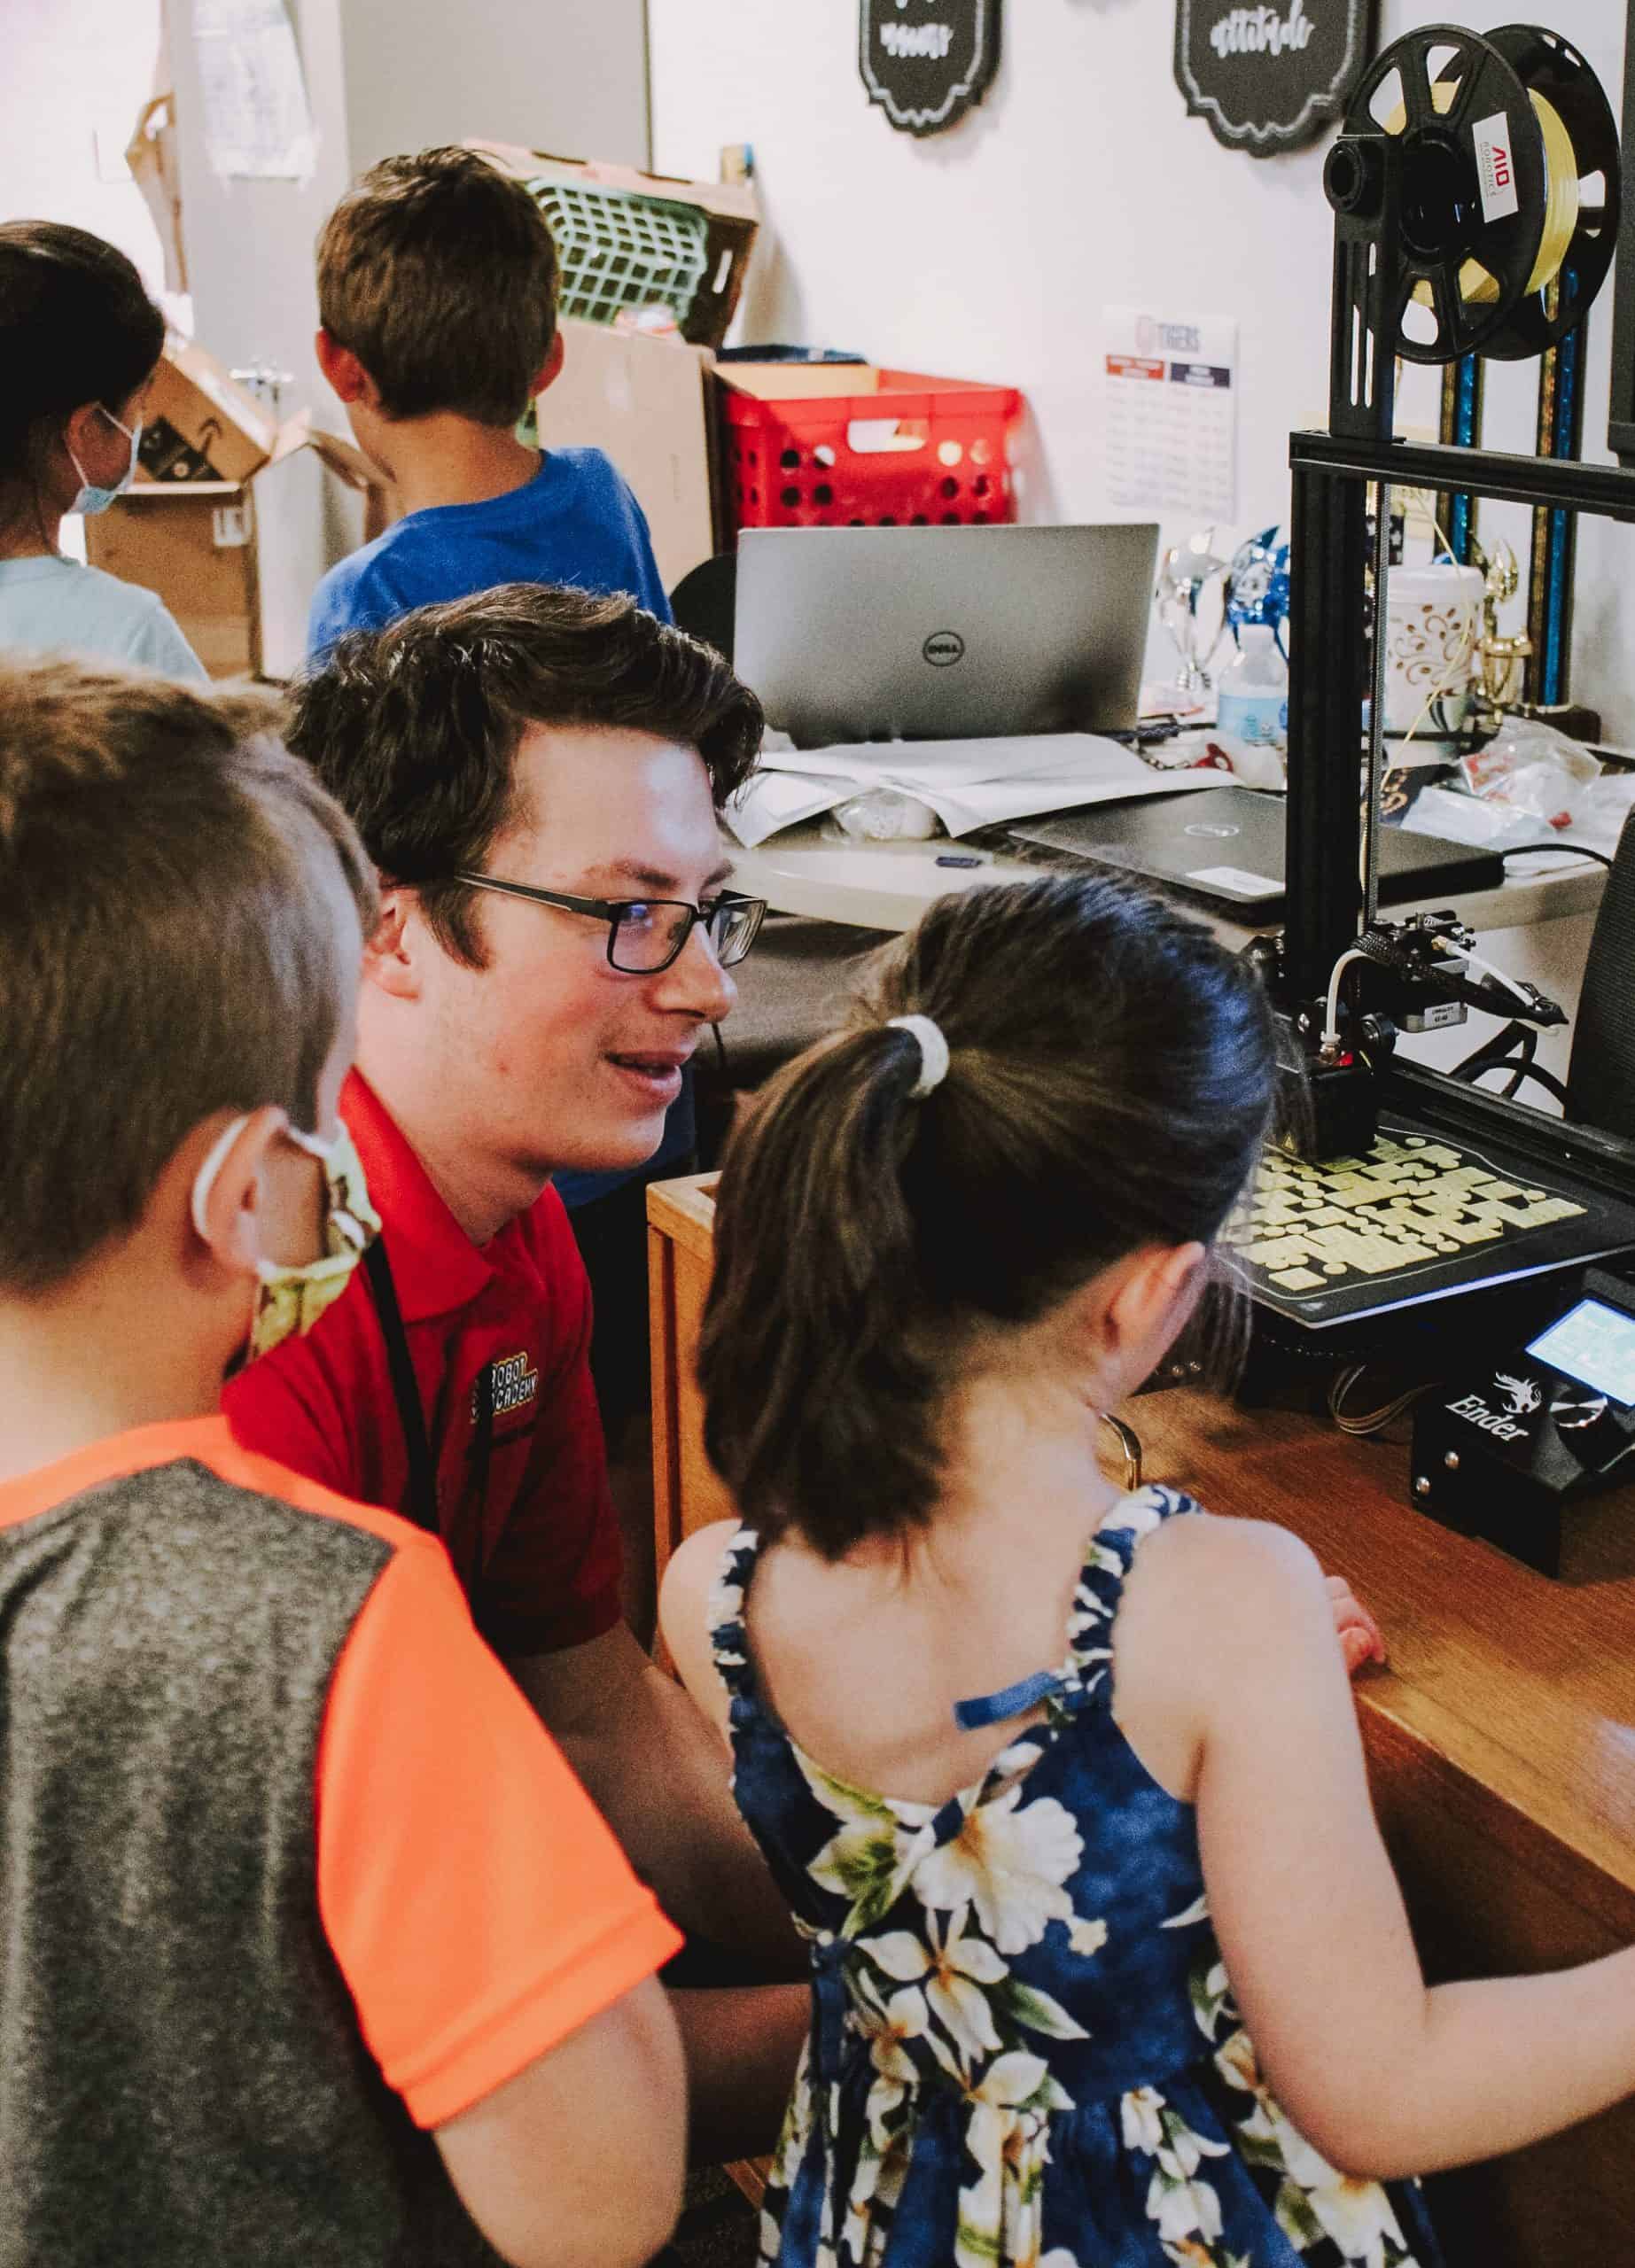 You are currently viewing Sr. LEGO® Robotics & 3D Printing Camp for ages 8 to 13 | Morning | 5 Days: July 24-28, 2023 | 9:30 am to 12:30 pm | Powell